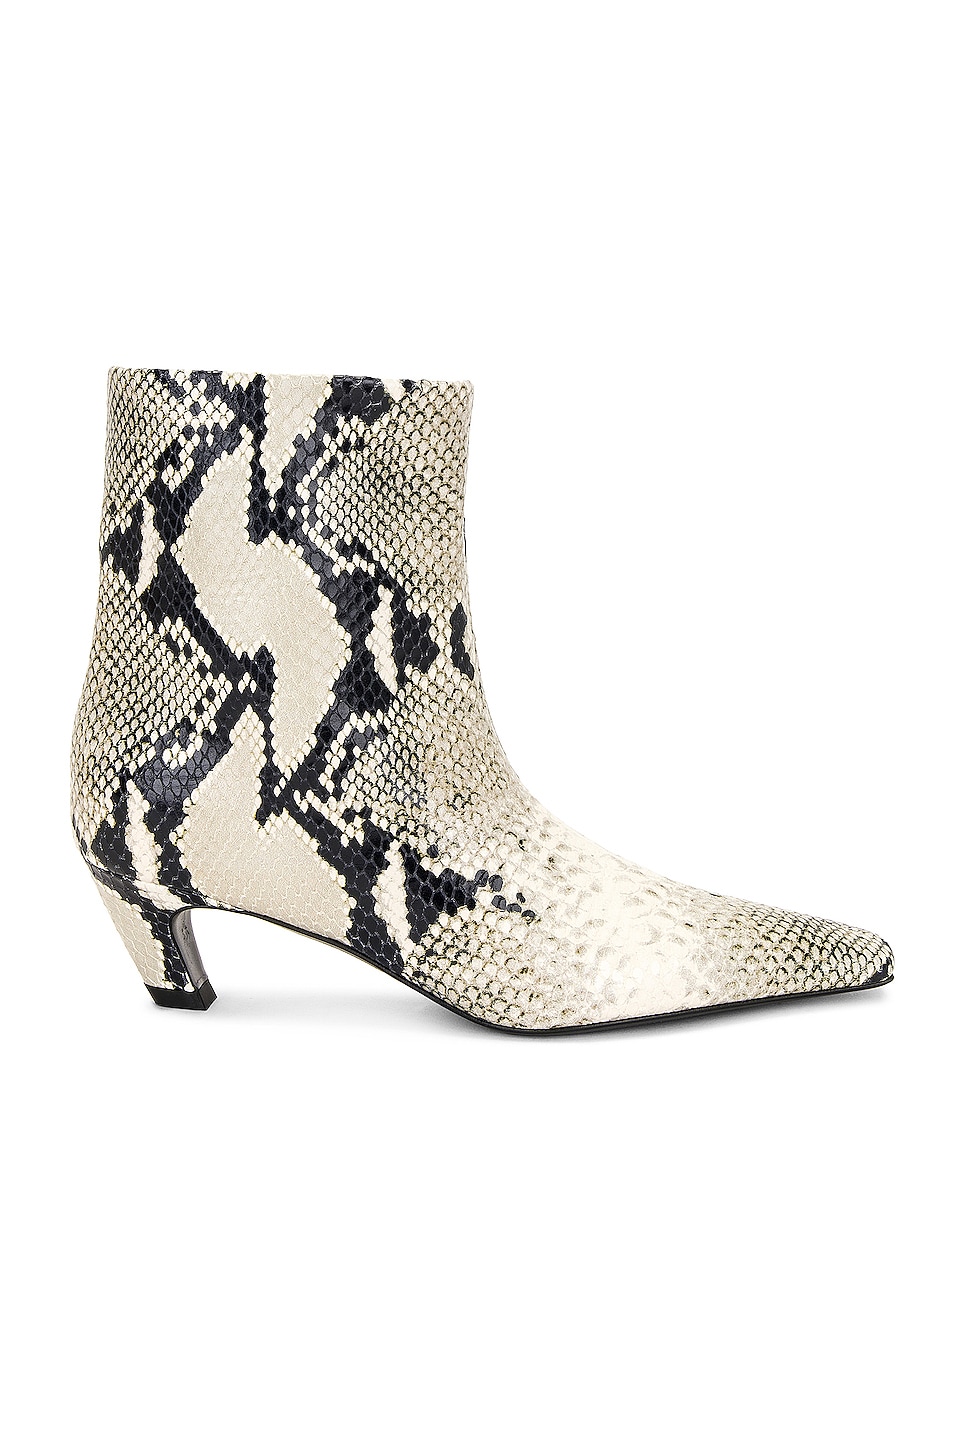 Image 1 of KHAITE Arizona Ankle Boot in Natural